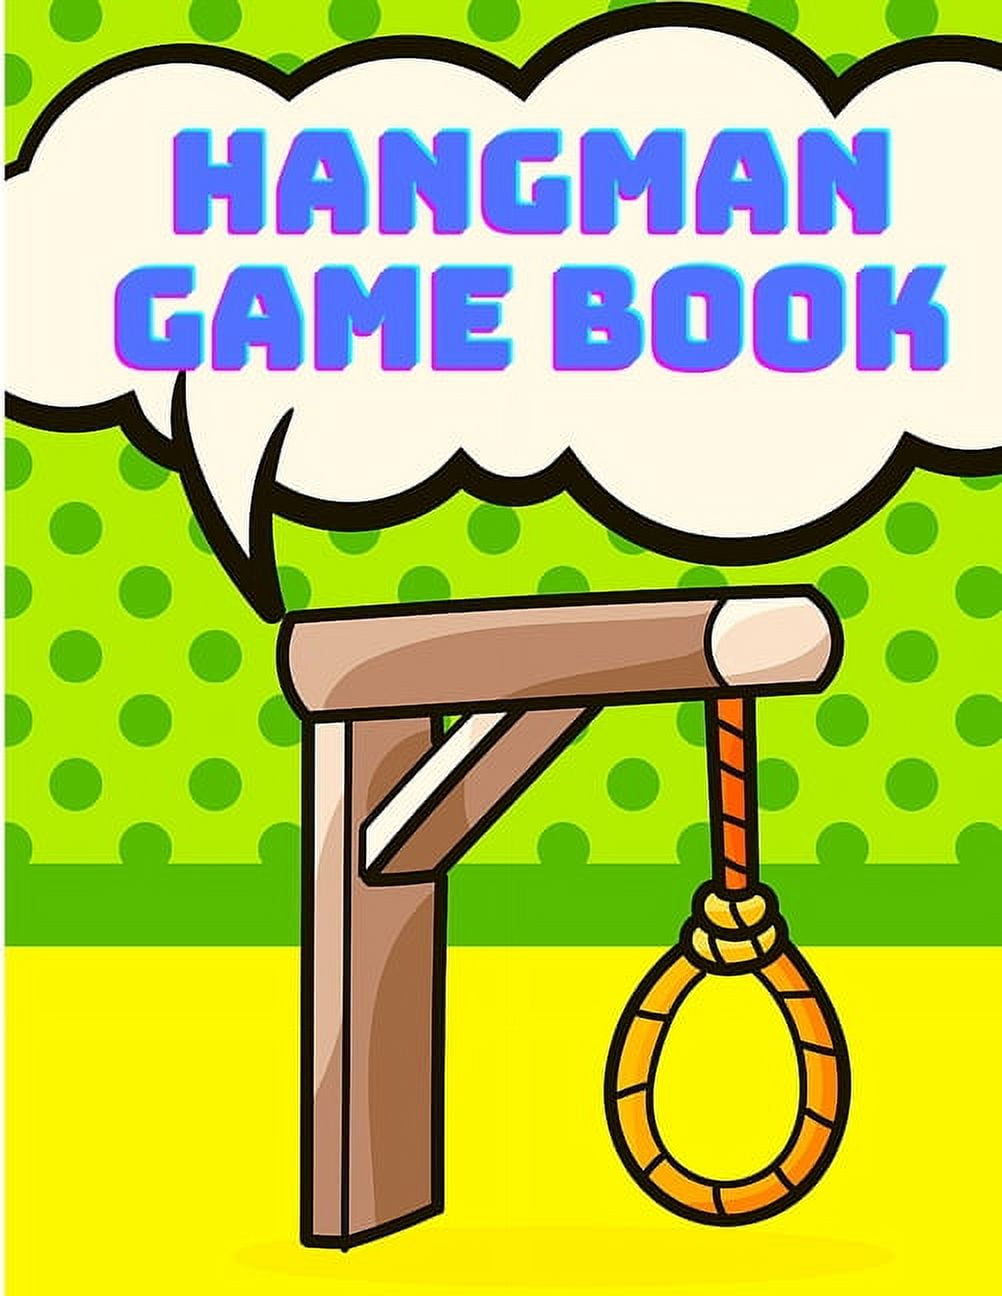 Play Hangman Puzzles Online for Free: ProProfs Games